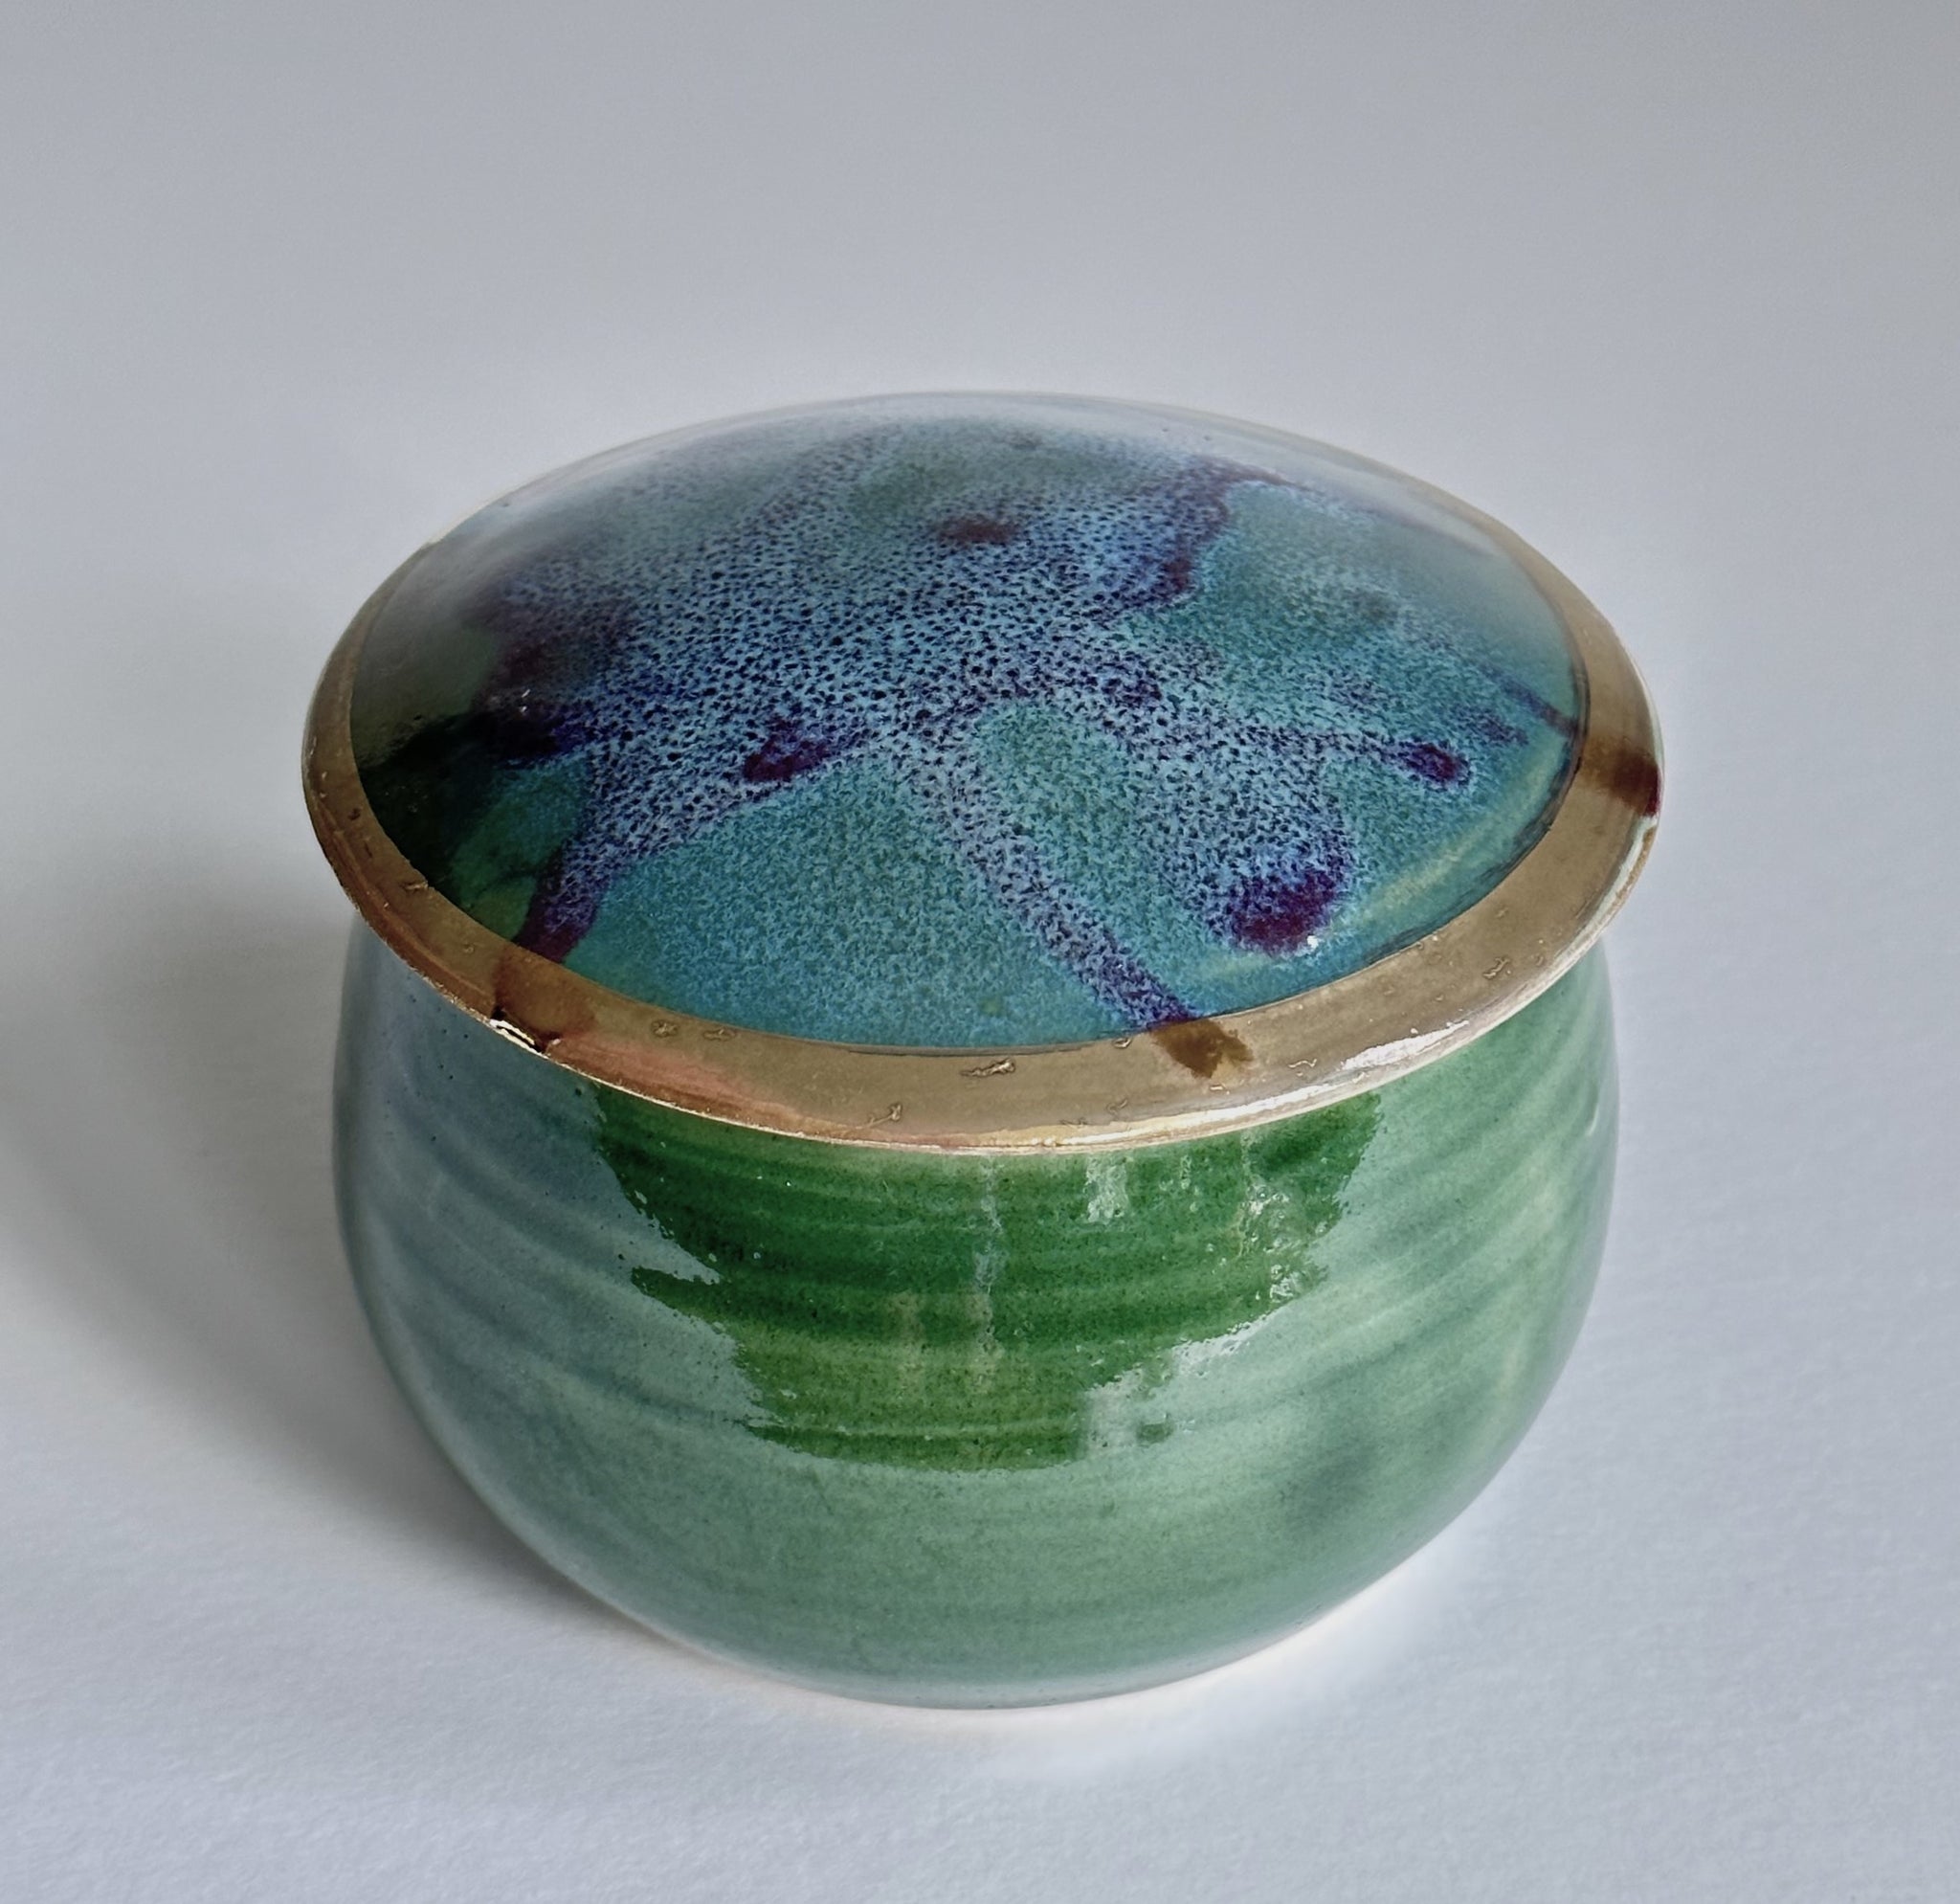 Treasure Jar - Green, Purple and Turquoise with Gold